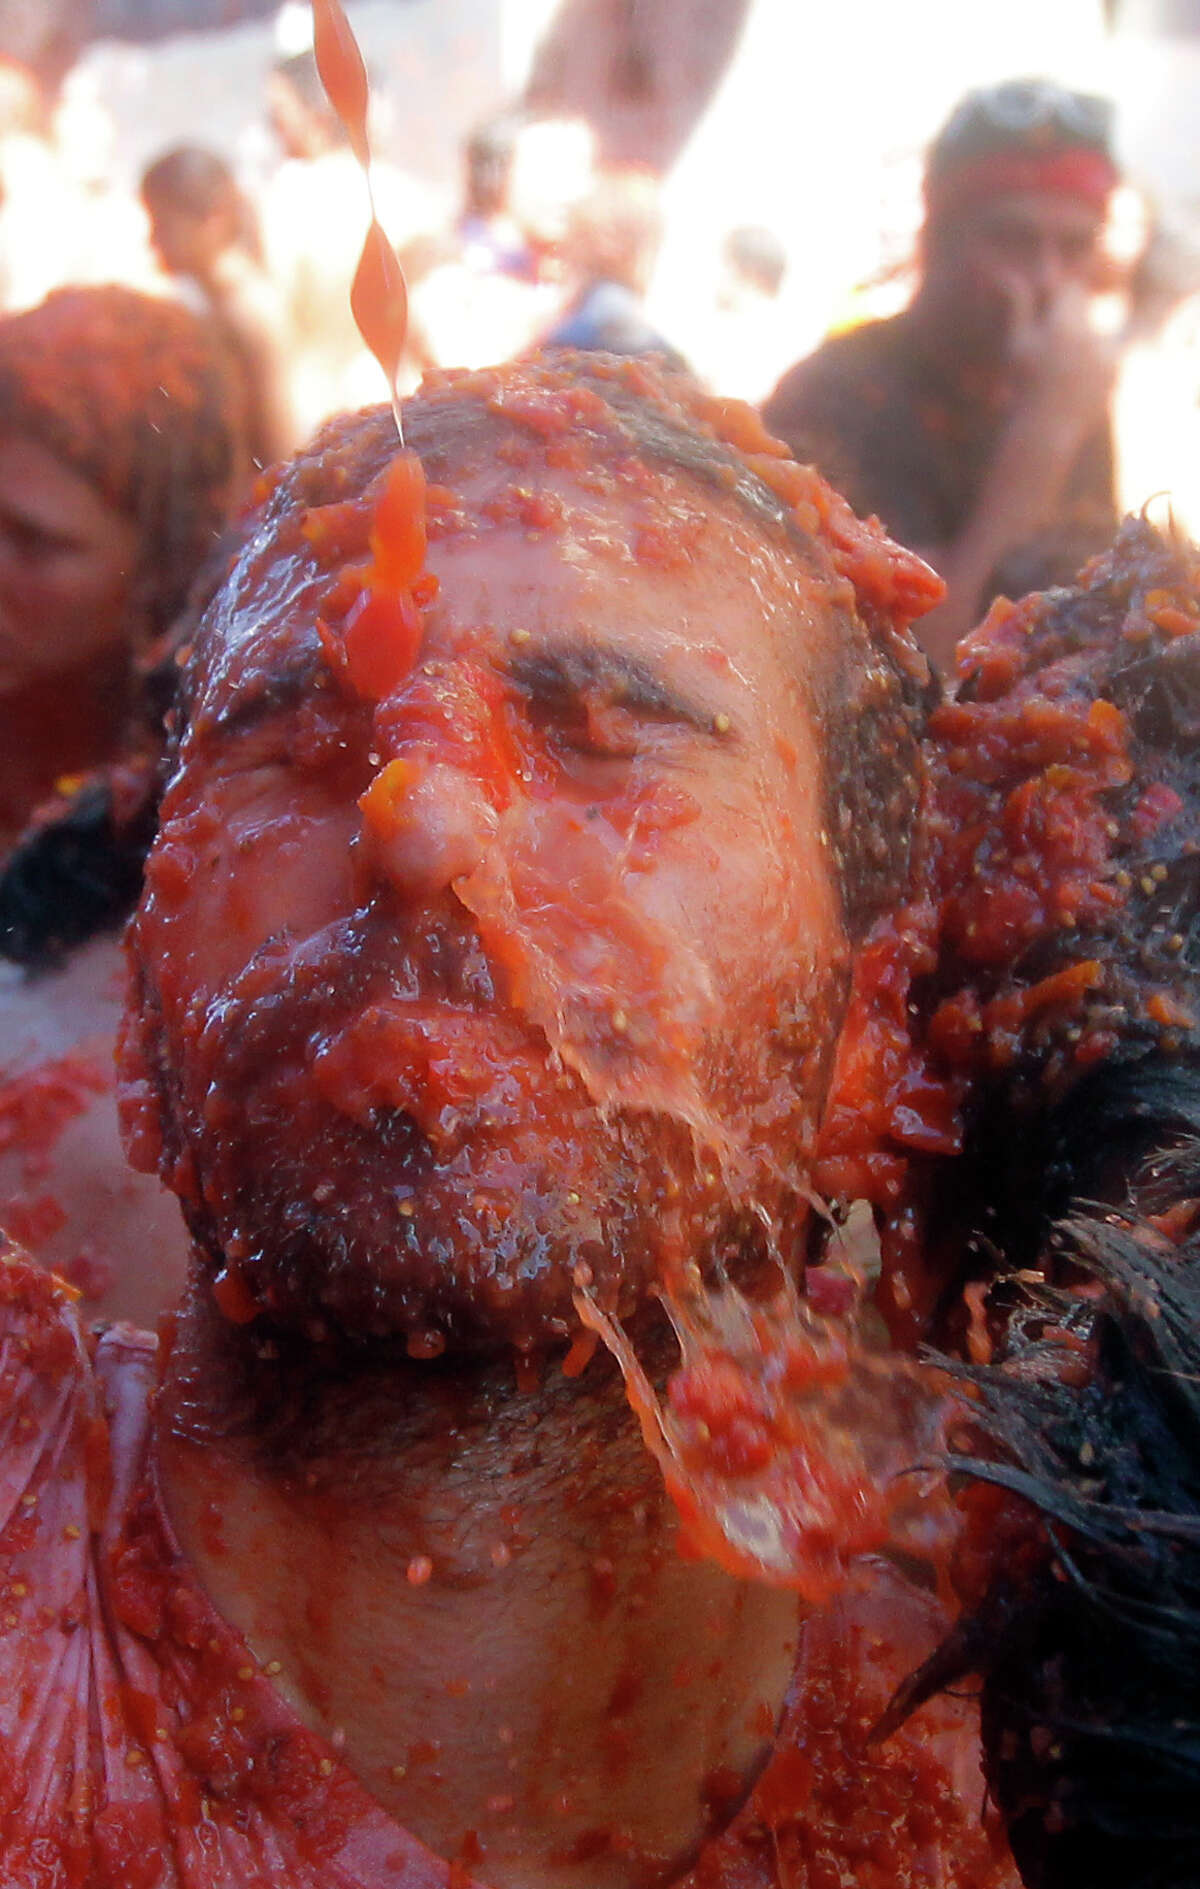 A man reacts as he is hit with tomatoes, during the annual "tomatina" tomato fight fiesta in the village of Bunol, 50 kilometers outside Valencia, Spain, Wednesday, Aug. 27, 2014. The streets of an eastern Spanish town are awash with red pulp as thousands of people pelt each other with tomatoes in the annual "Tomatina" battle that has become a major tourist attraction. At the annual fiesta in Bunol on Wednesday, trucks dumped 125 tons of ripe tomatoes for some 22,000 participants, many from abroad to throw during the hour-long morning festivities.